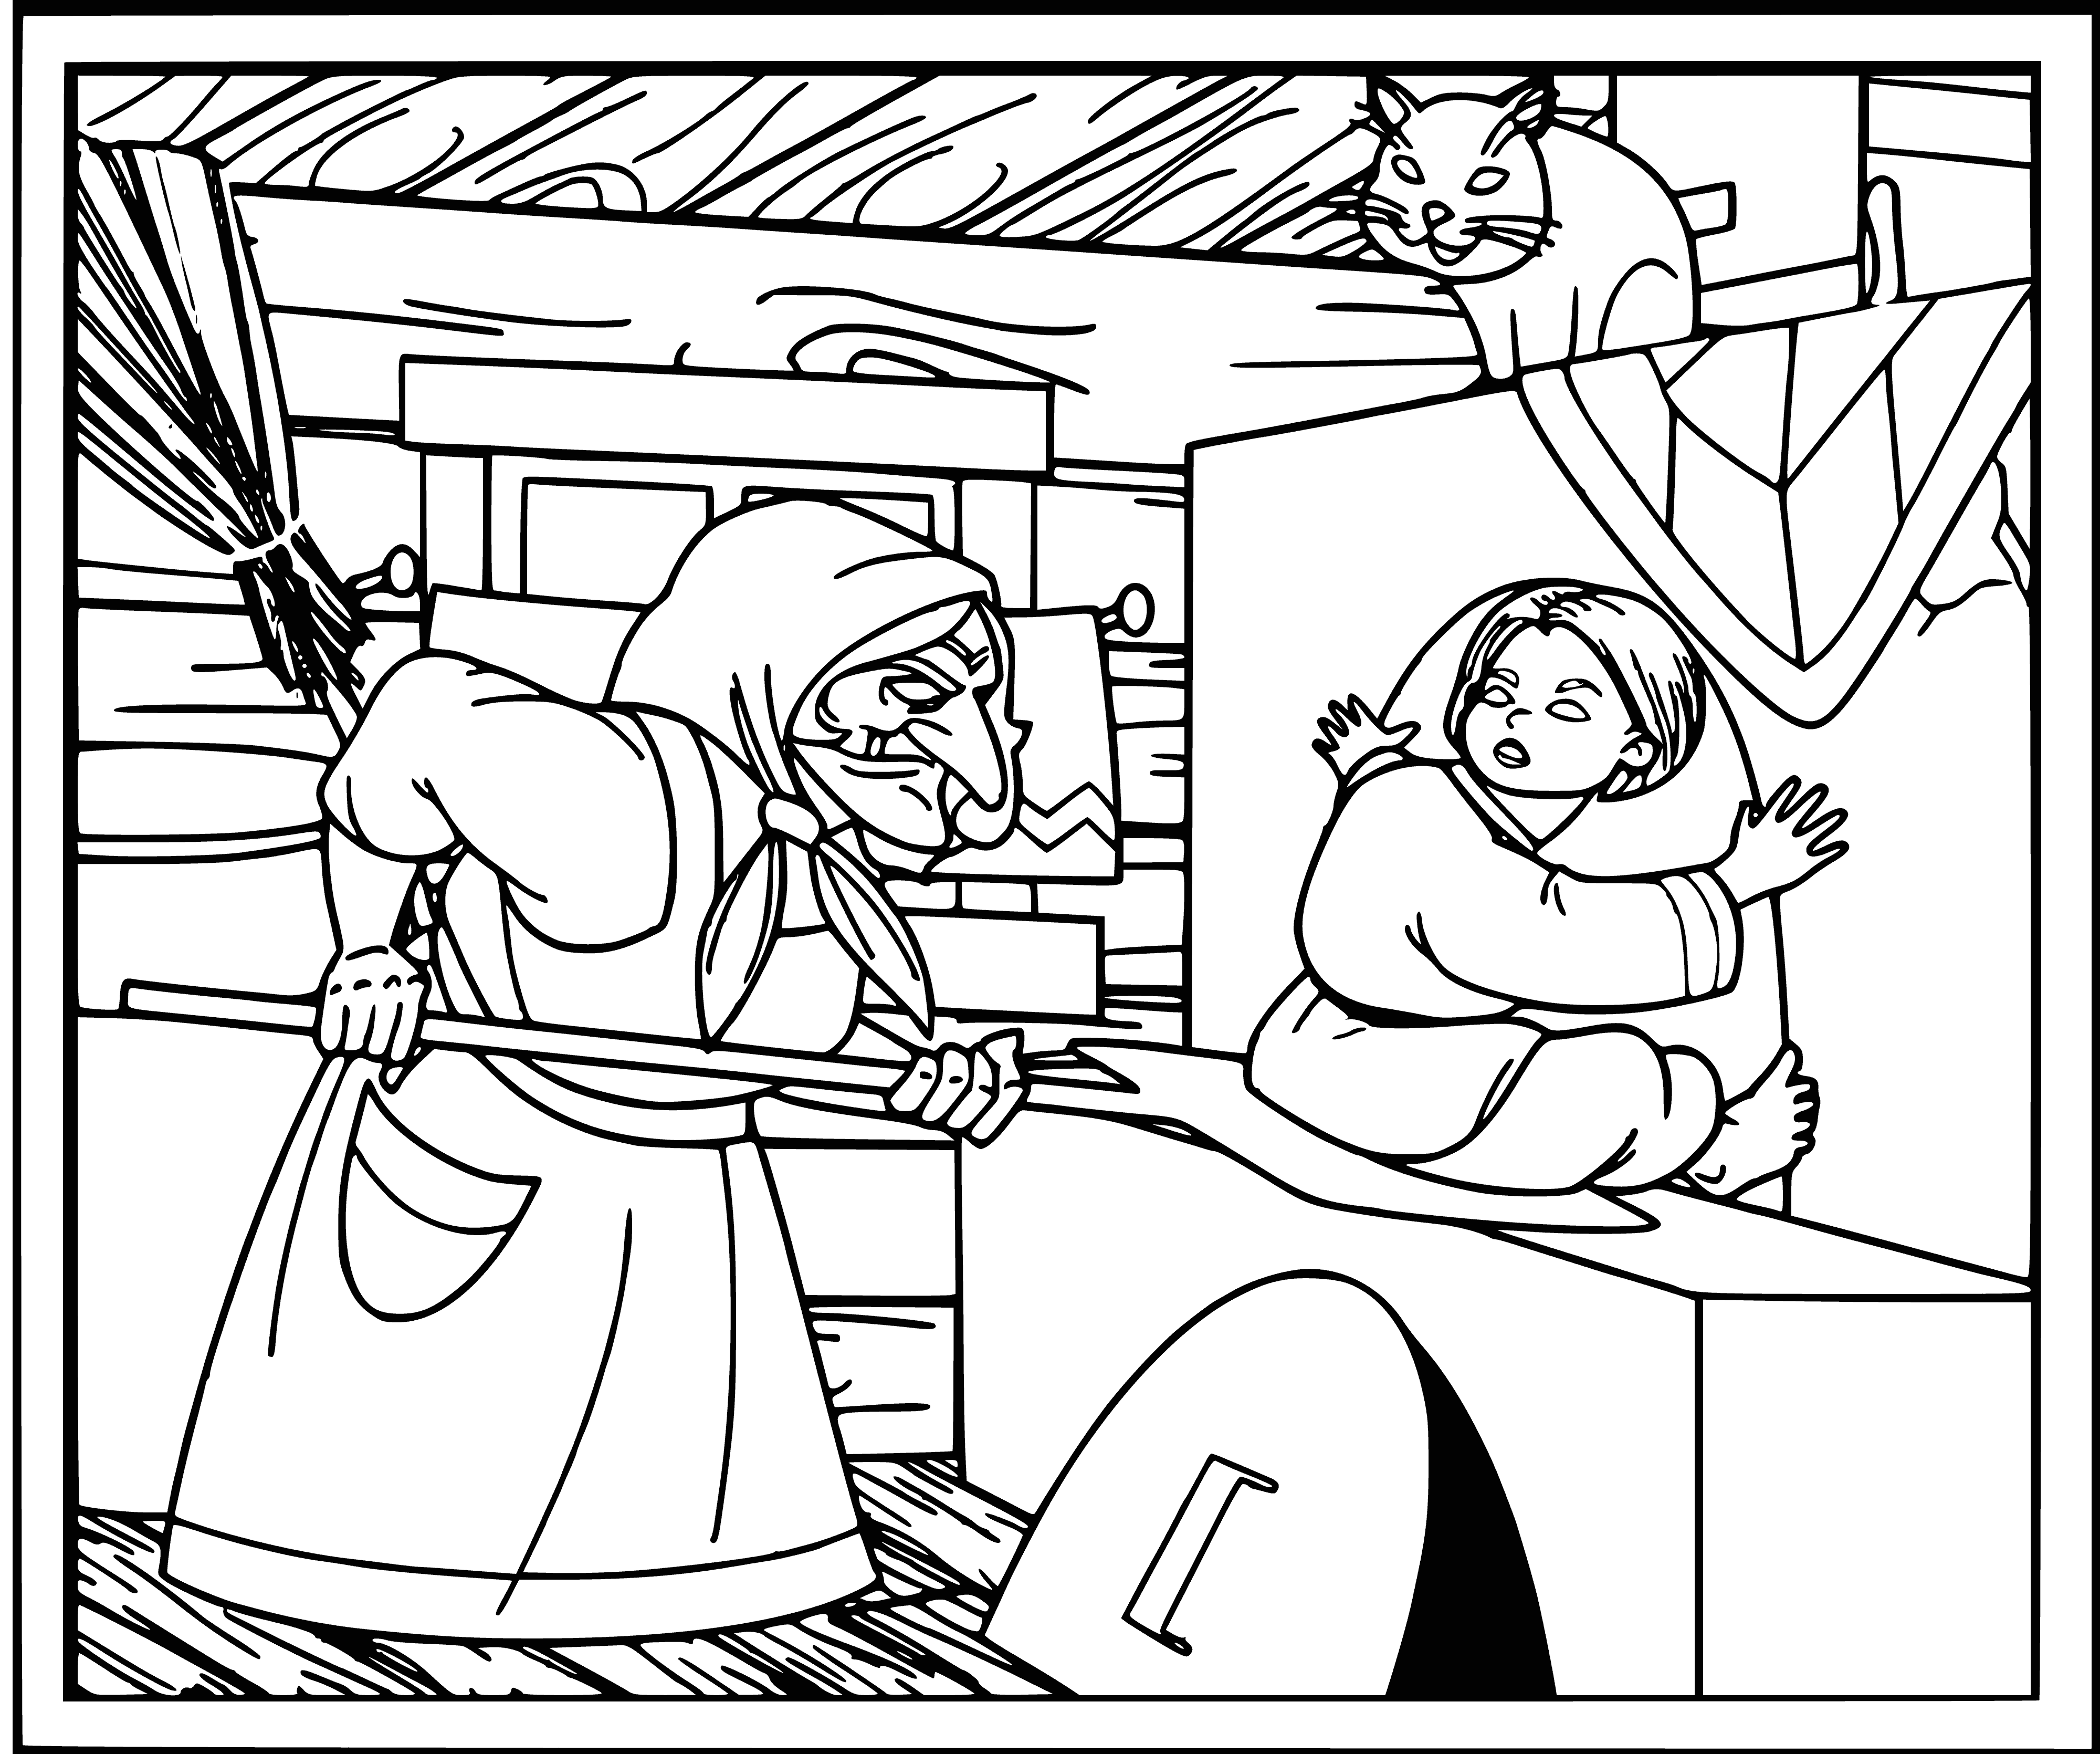 coloring page: Russian folk tale "Resident" depicts a large, dark-haired woman and 2 smaller women in red dresses in a dark forest illuminated by a full moon.